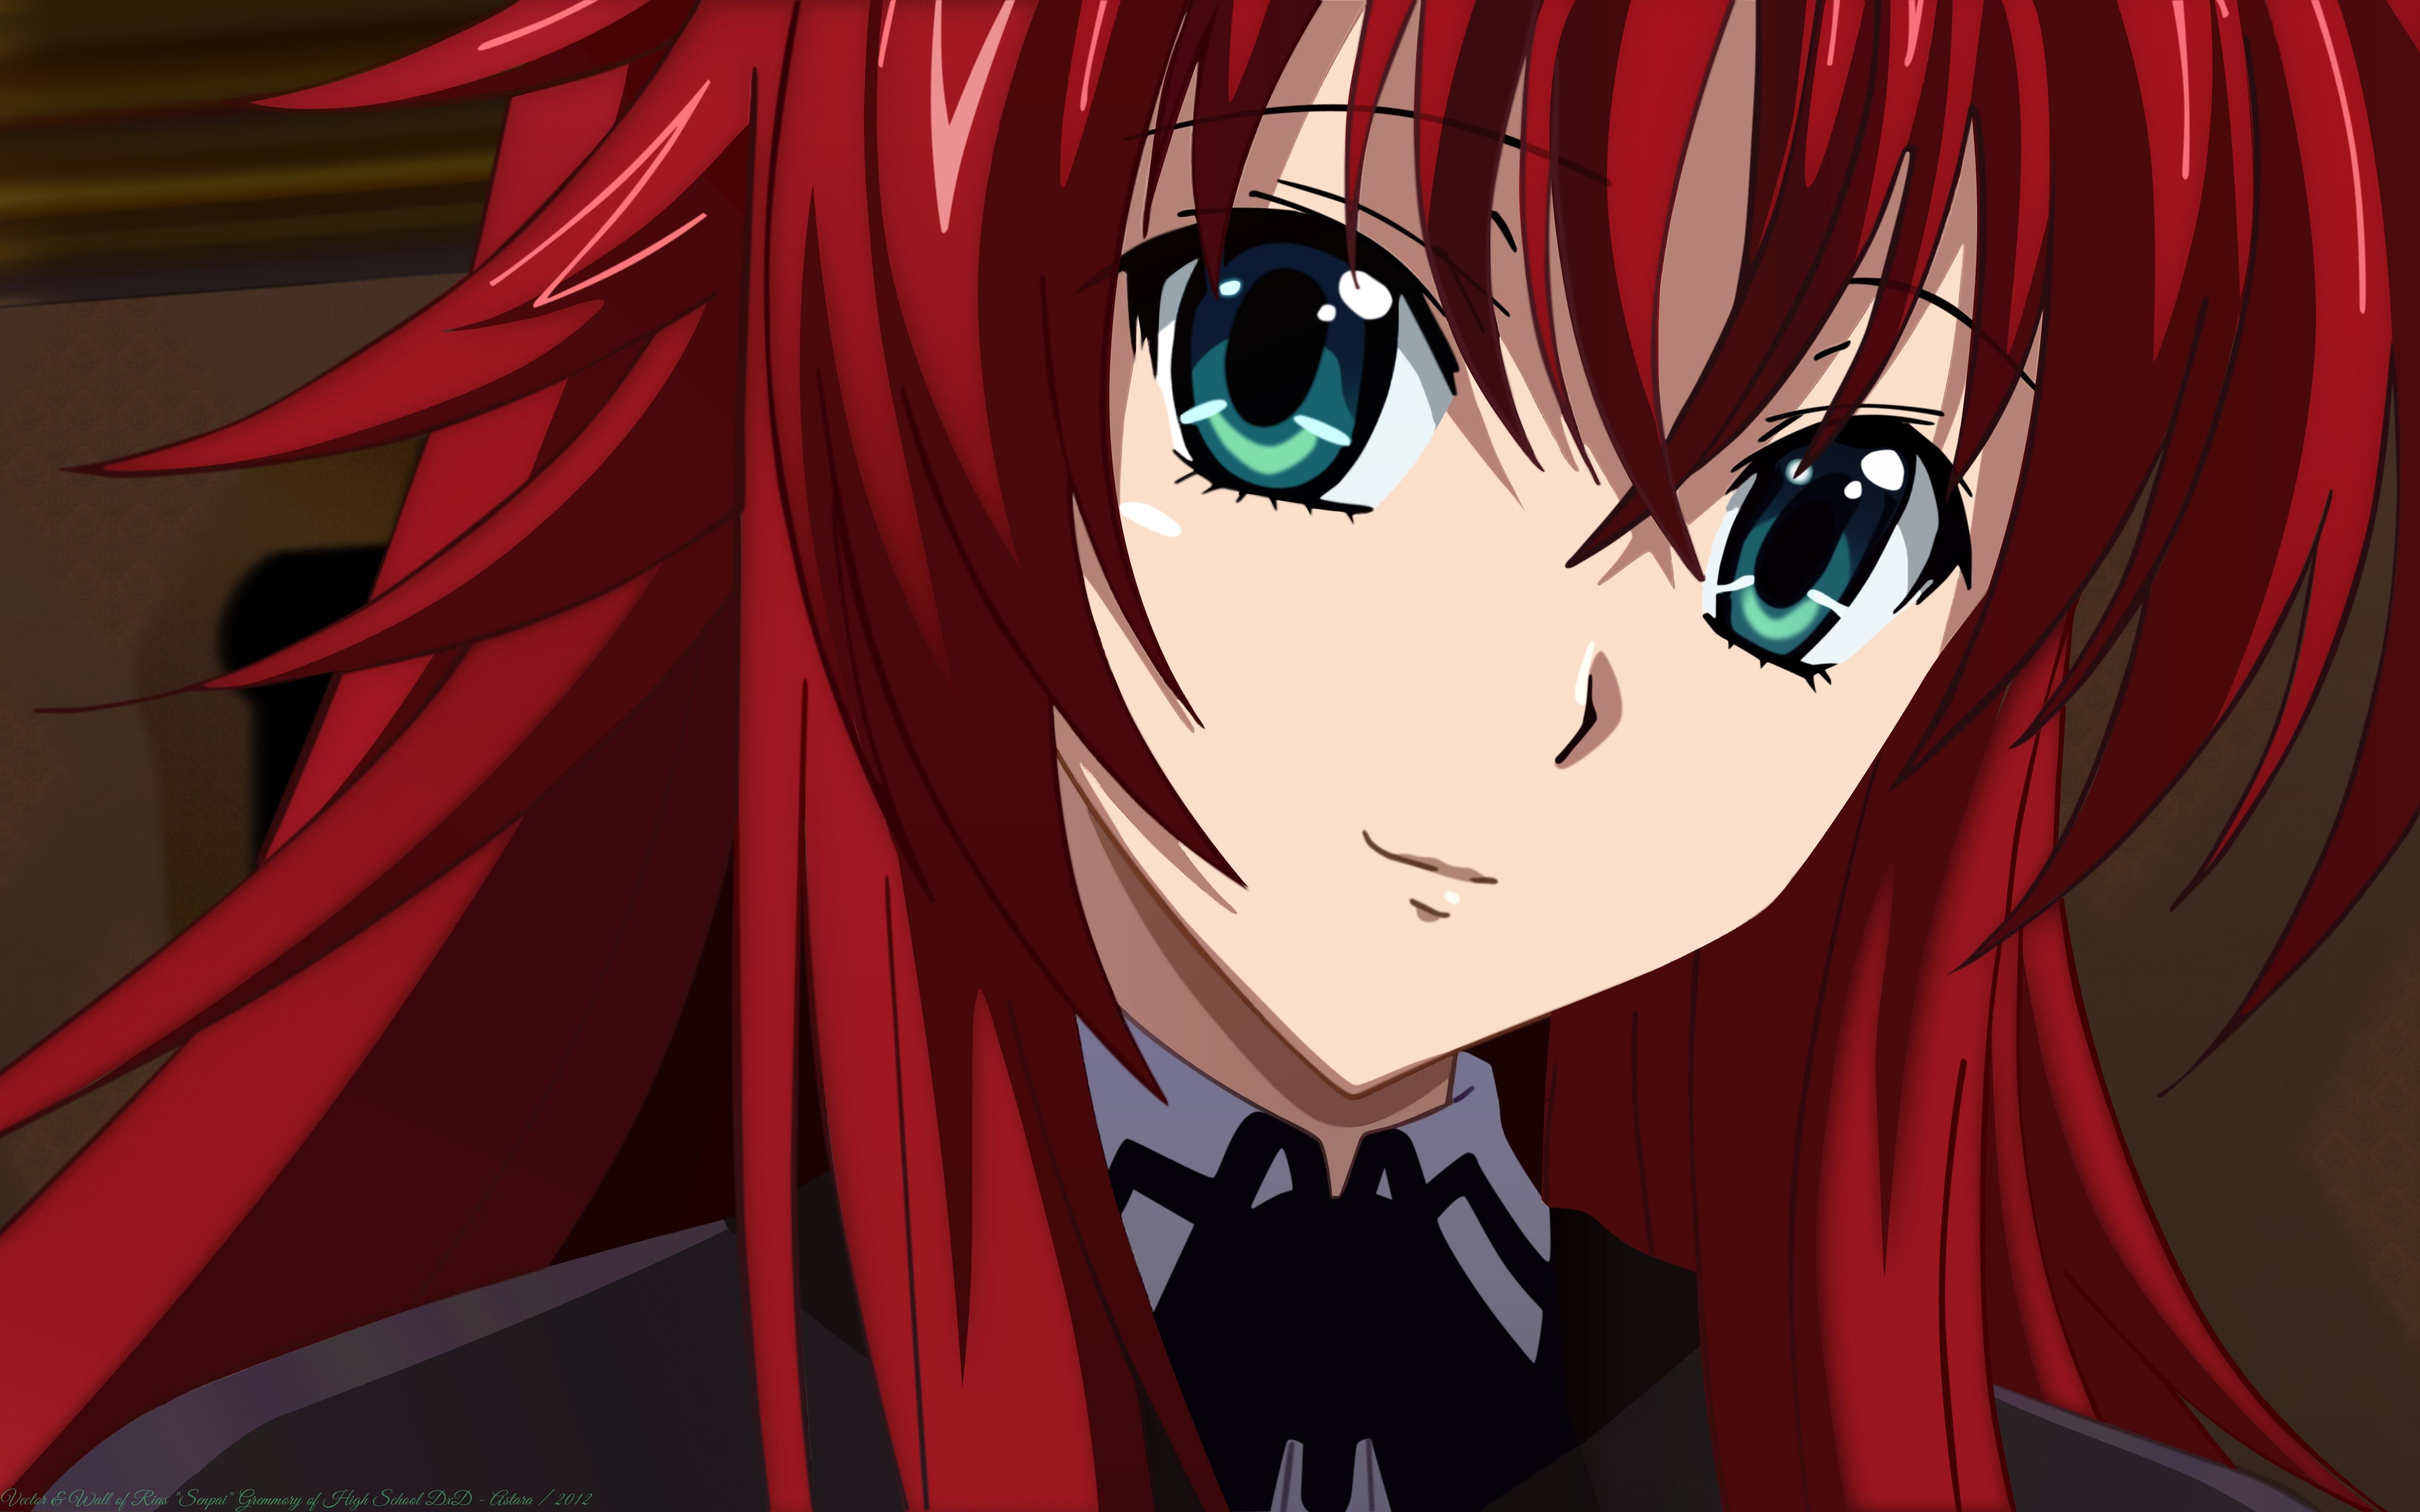 highscool, Dxd, Rias Wallpaper